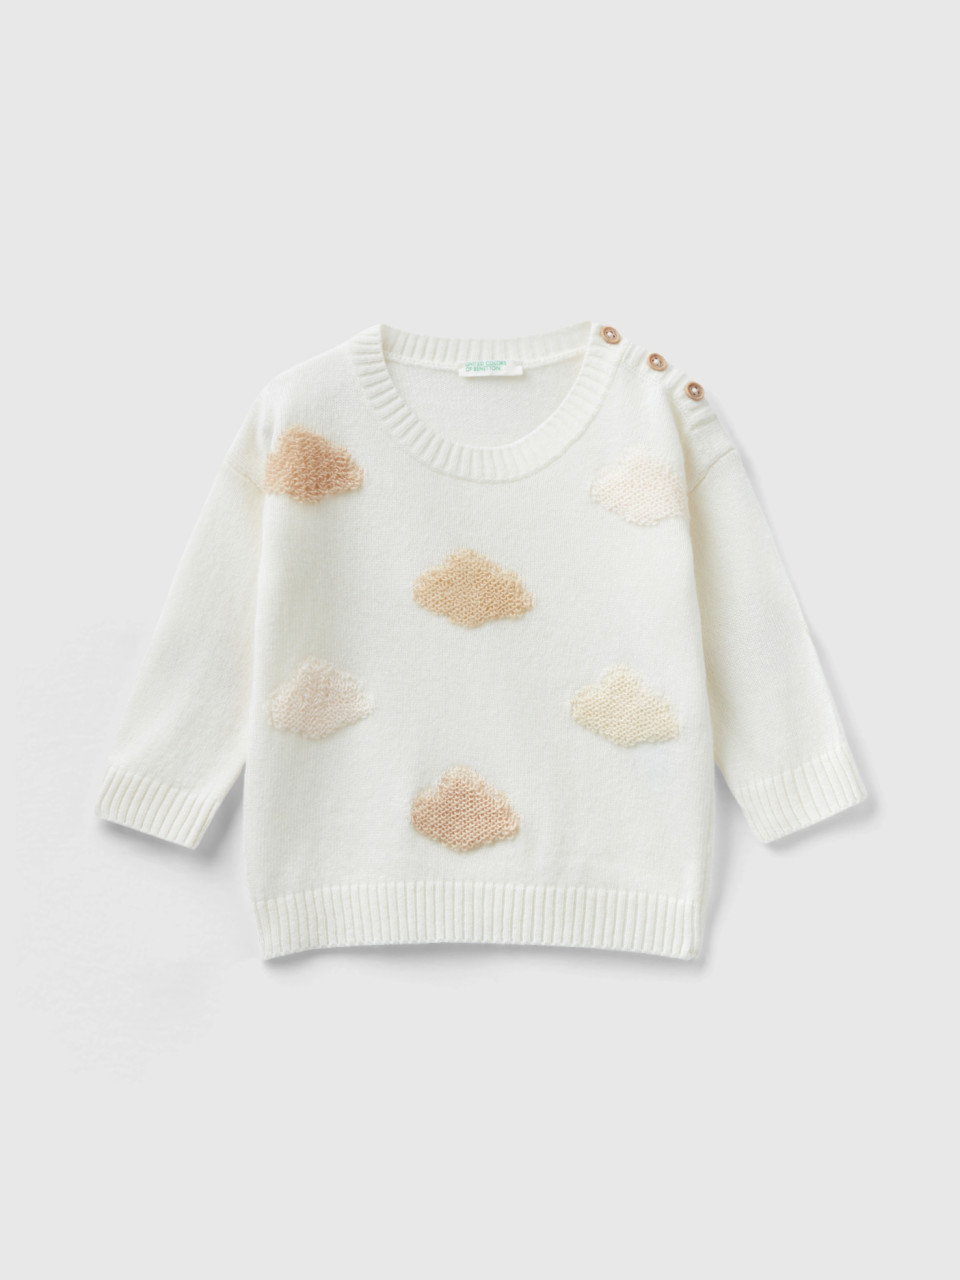 Benetton, Sweater With Clouds In Recycled Wool Blend, Creamy White, Kids